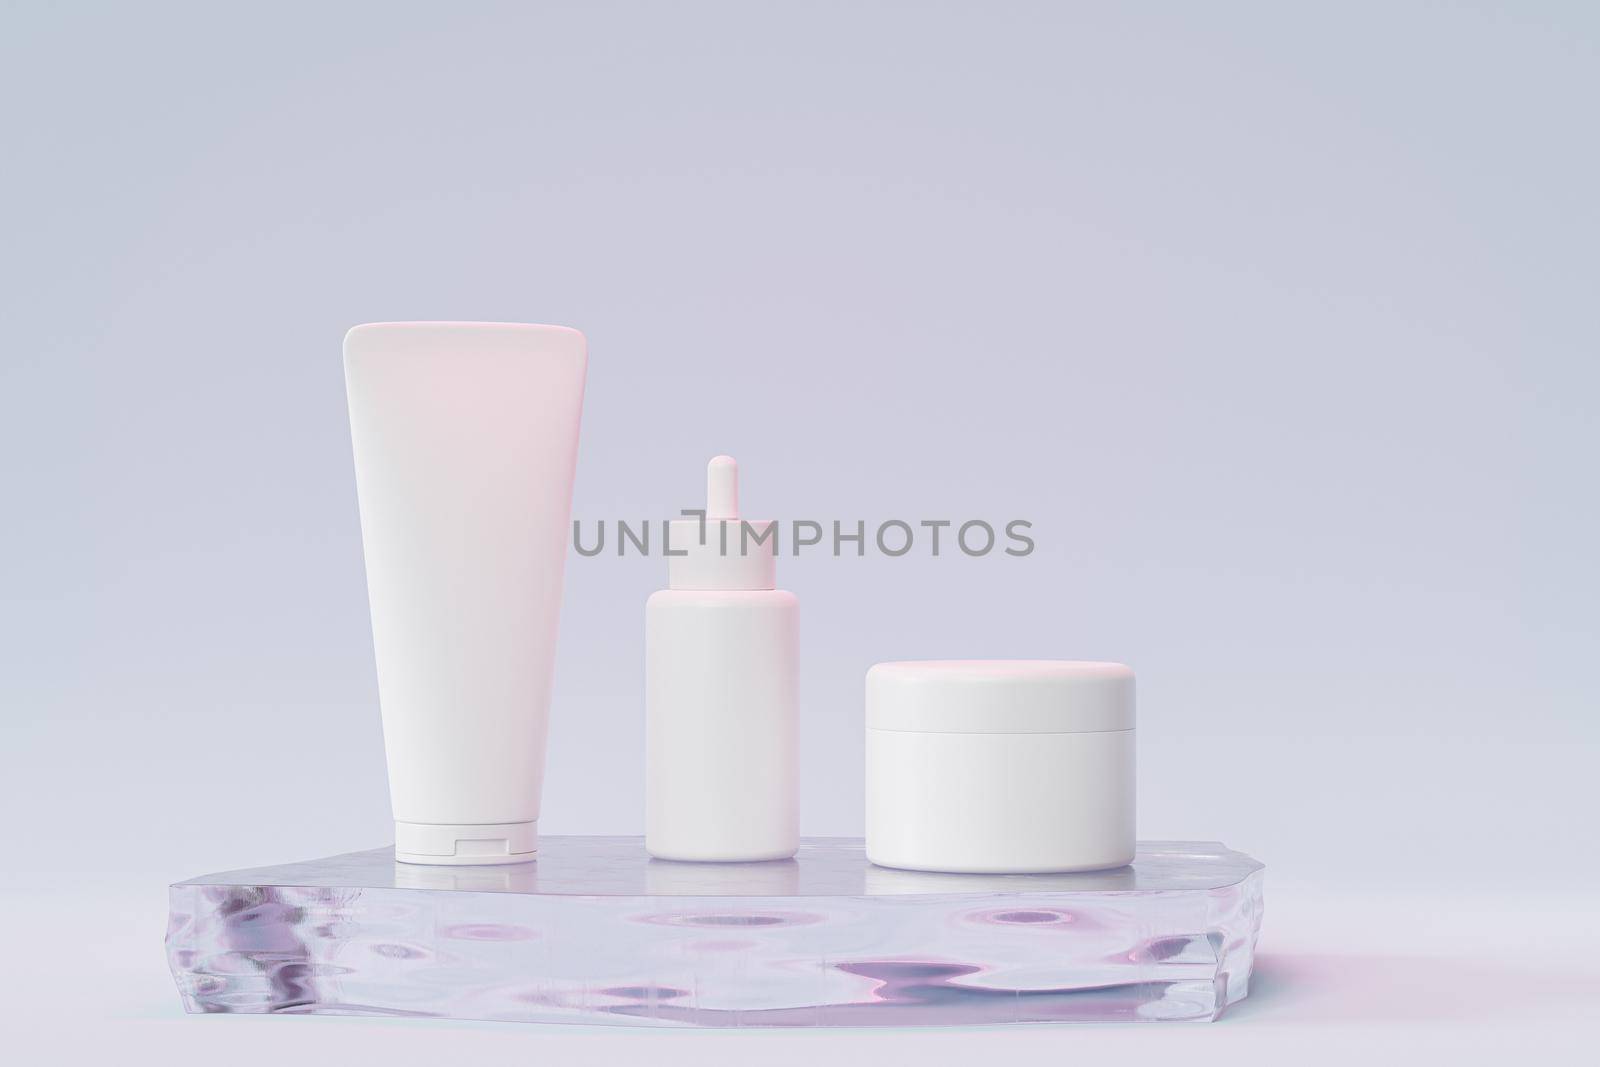 Mockup dropper bottle, lotion tube and cream jar for cosmetics products or advertising on glass podium, 3d illustration render by Frostroomhead